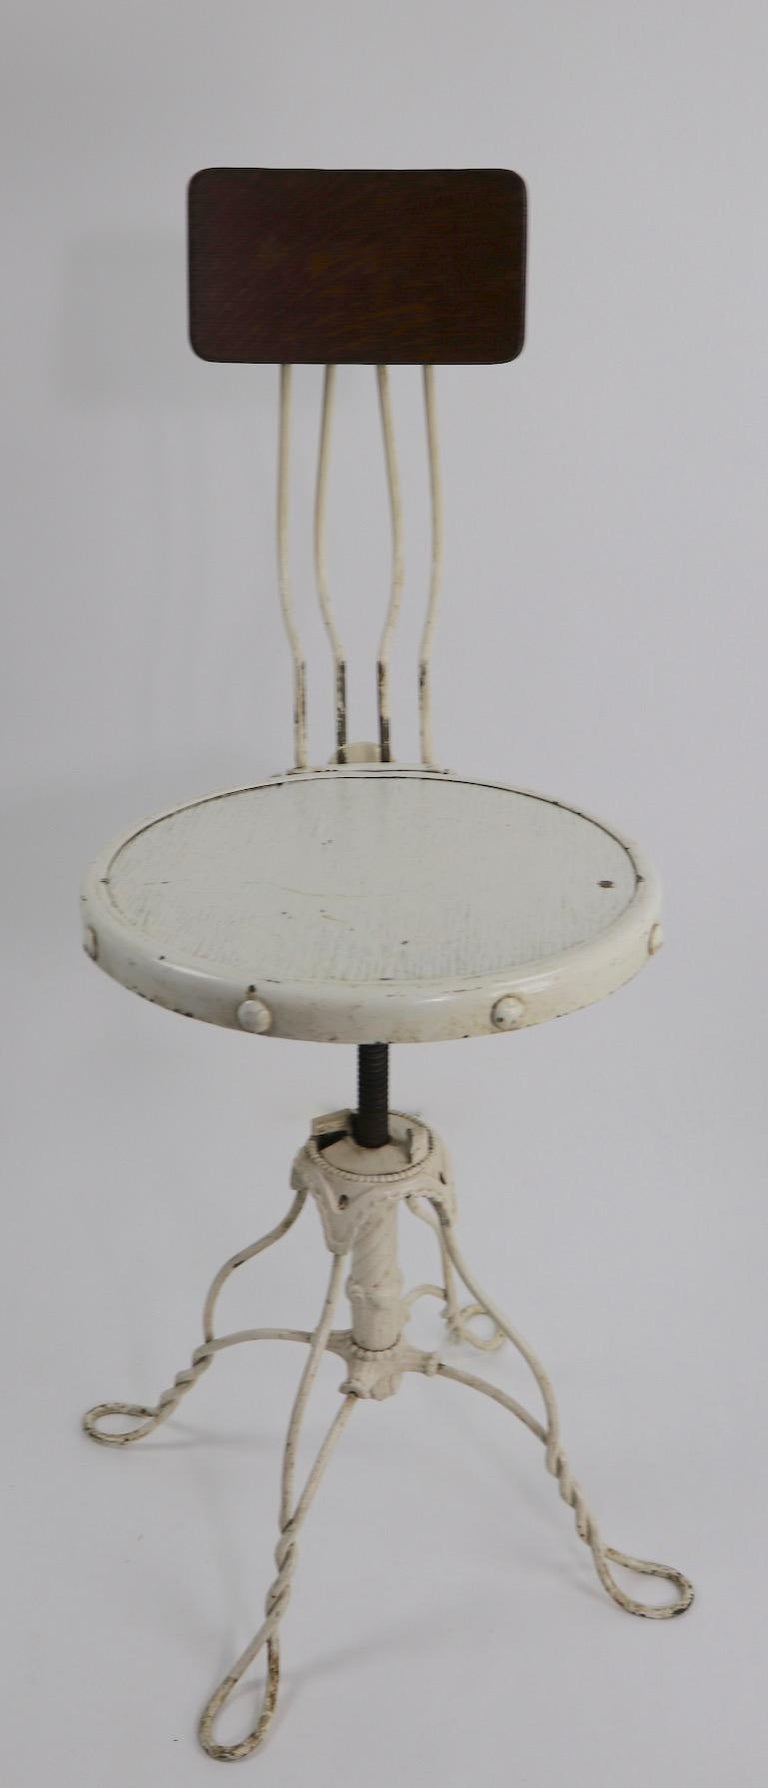 20th Century Industrial Adjustable Stool For Sale